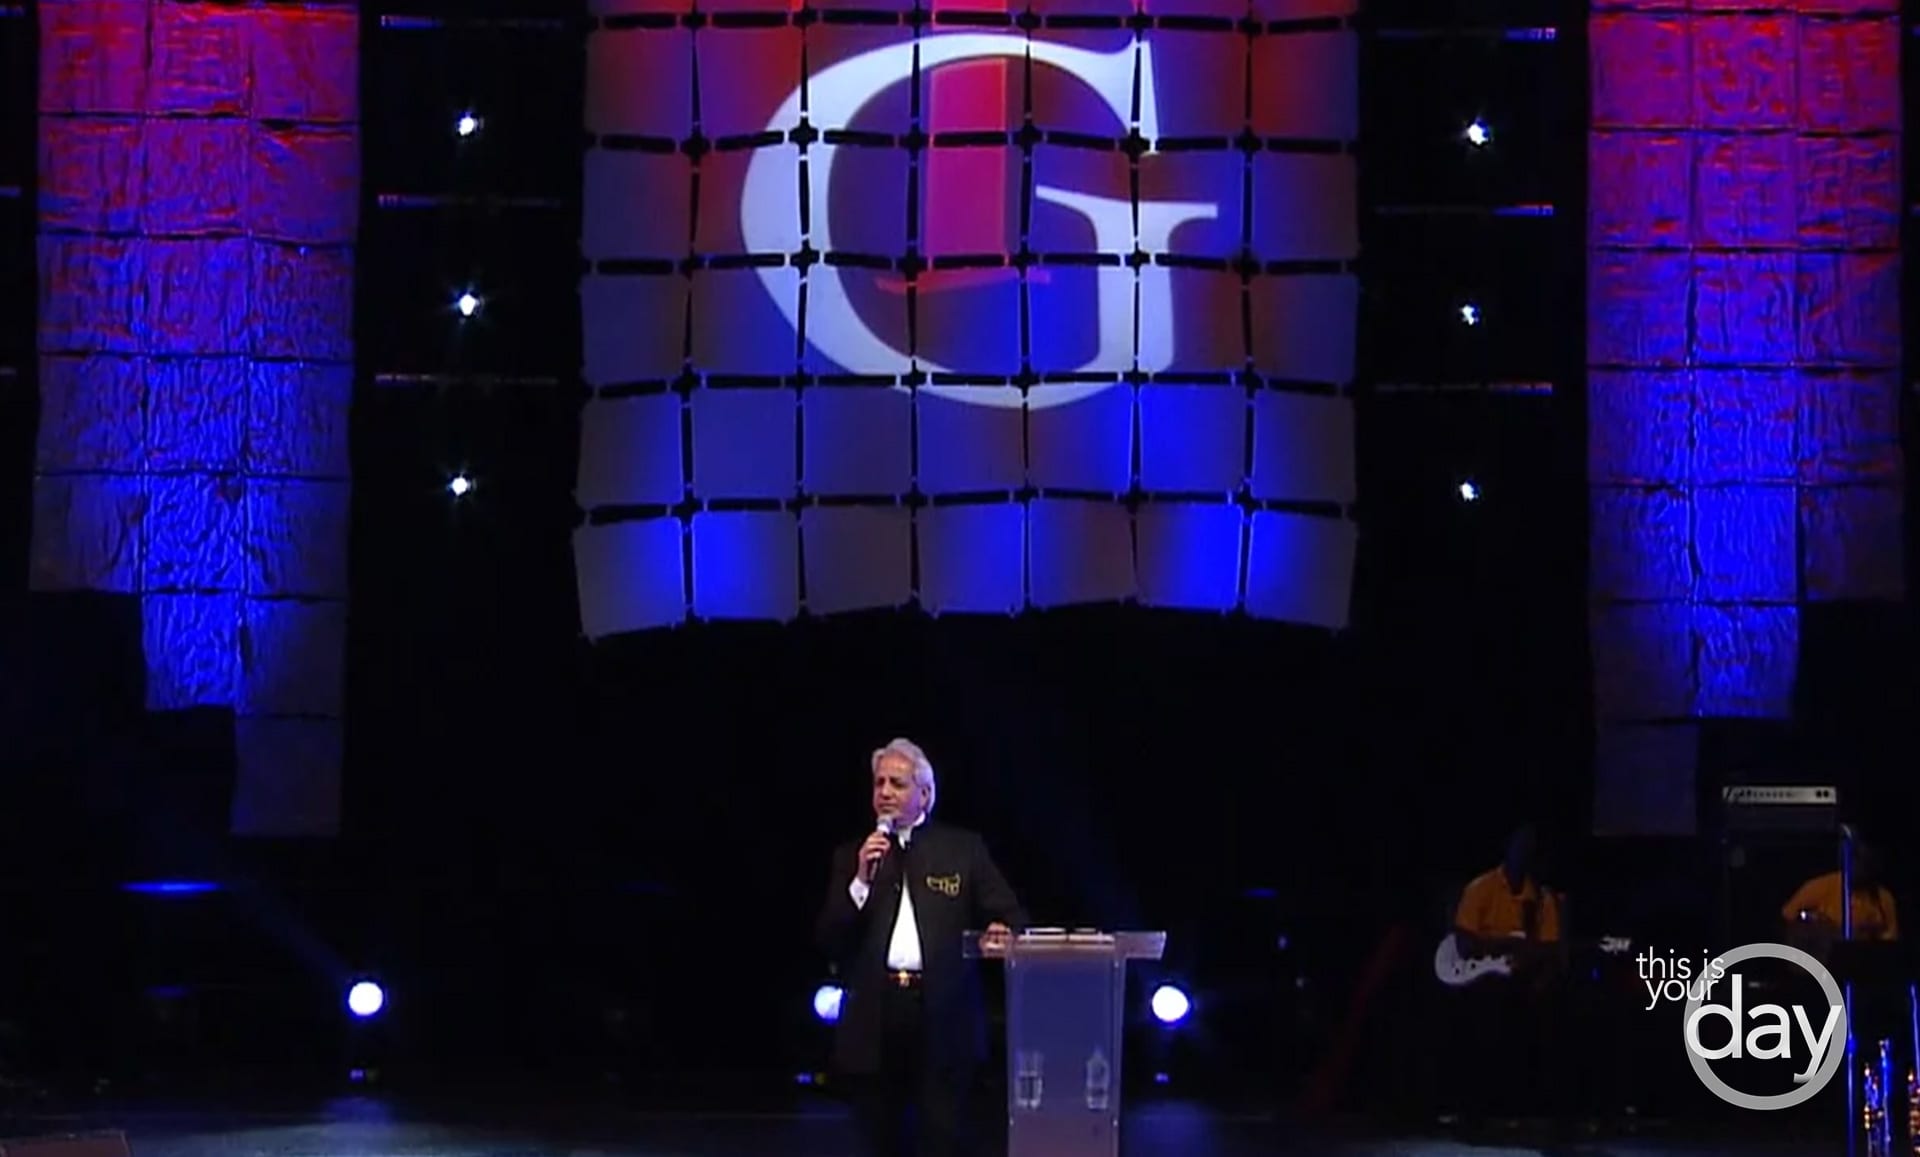 Greatest Miracle - This Is Your Day - Benny Hinn Ministries